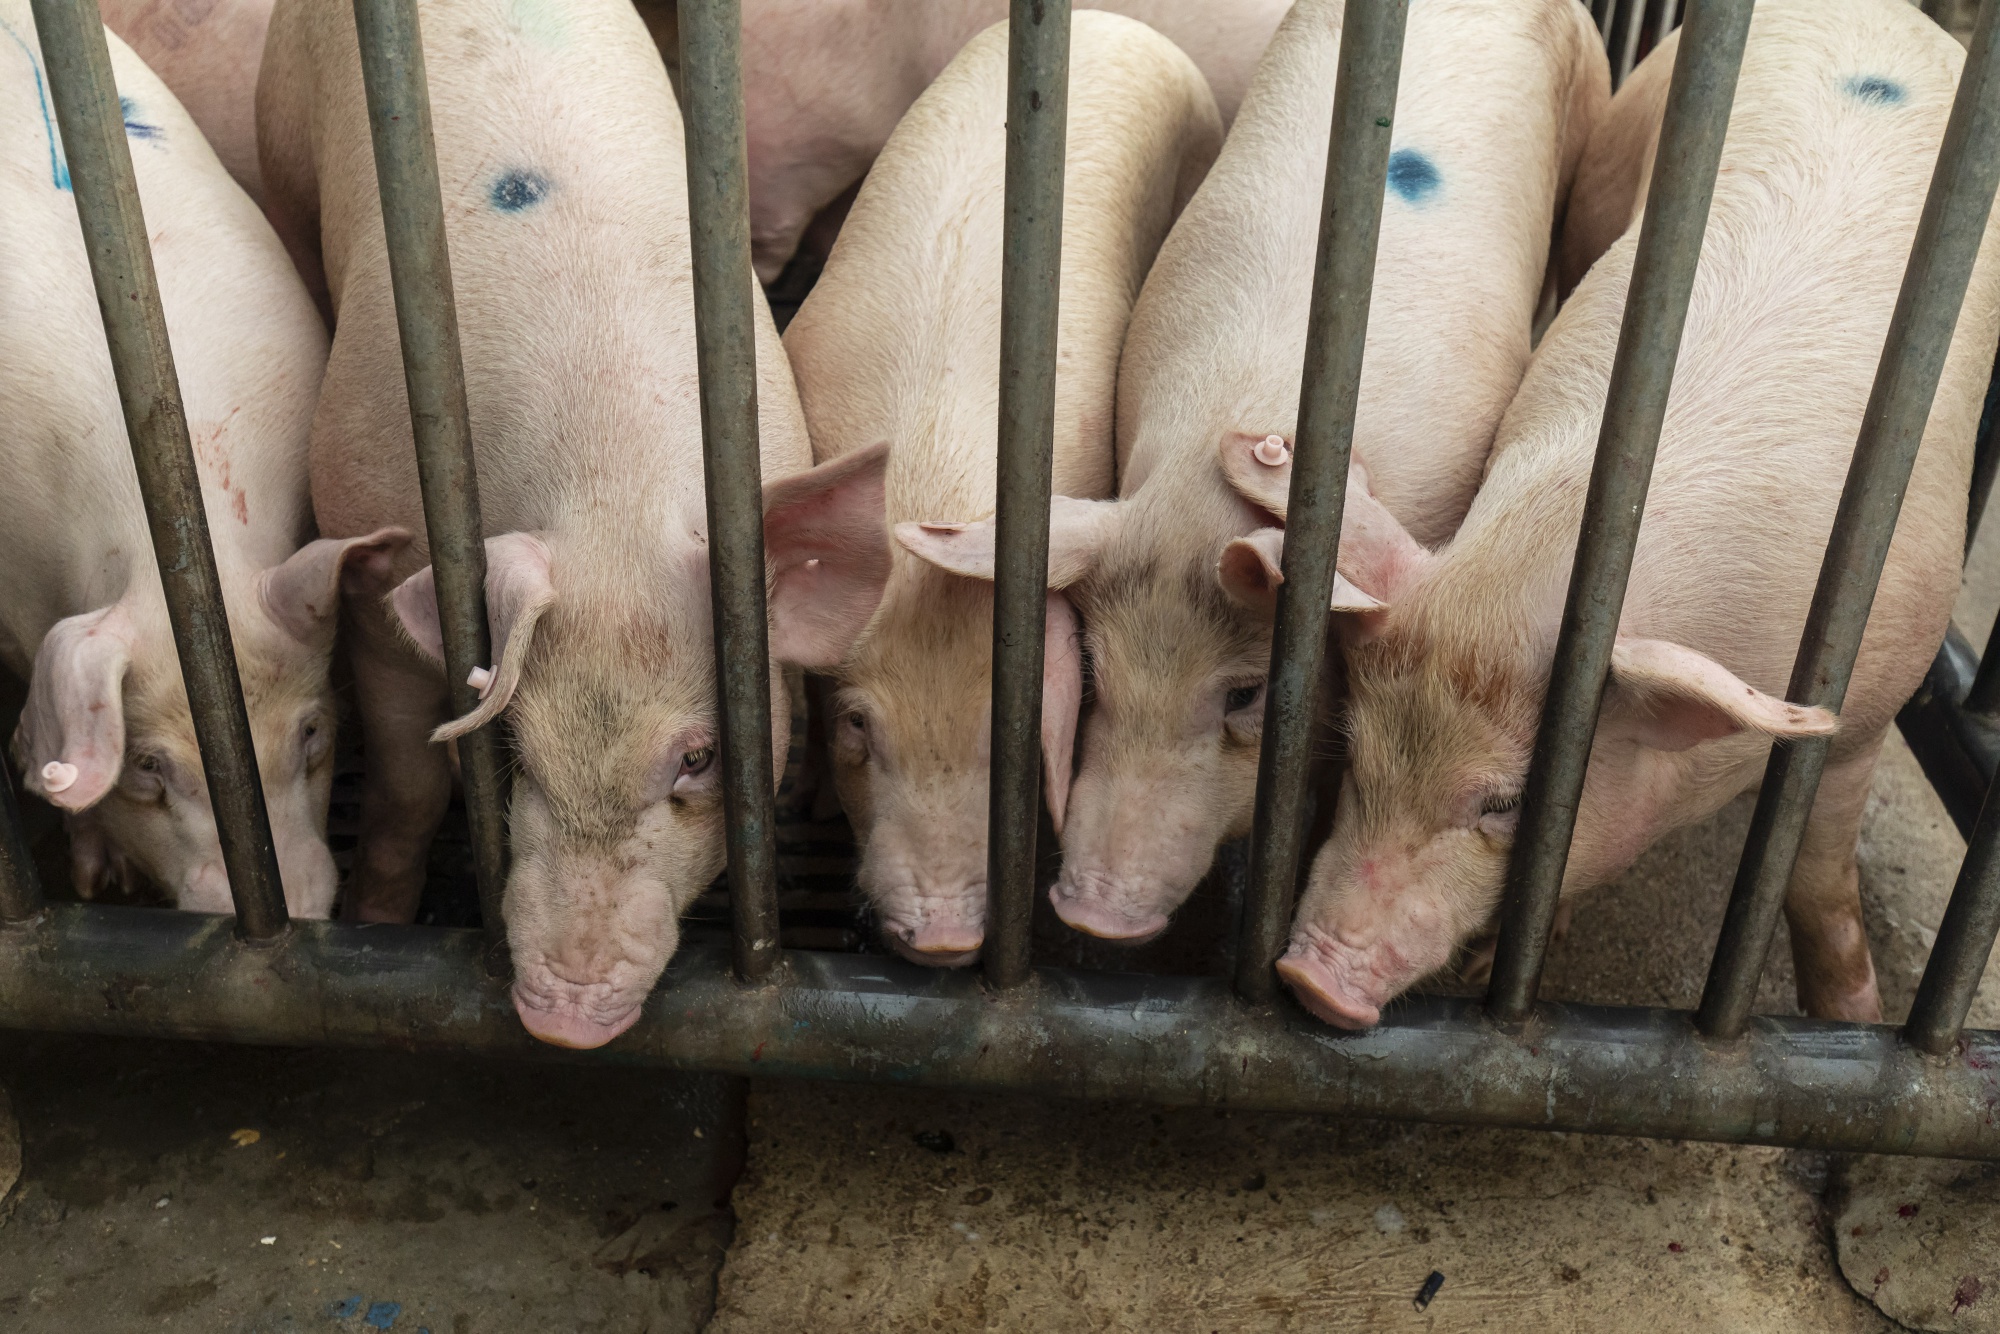 Pigs stand in a holding pen at a wholesale market in China.